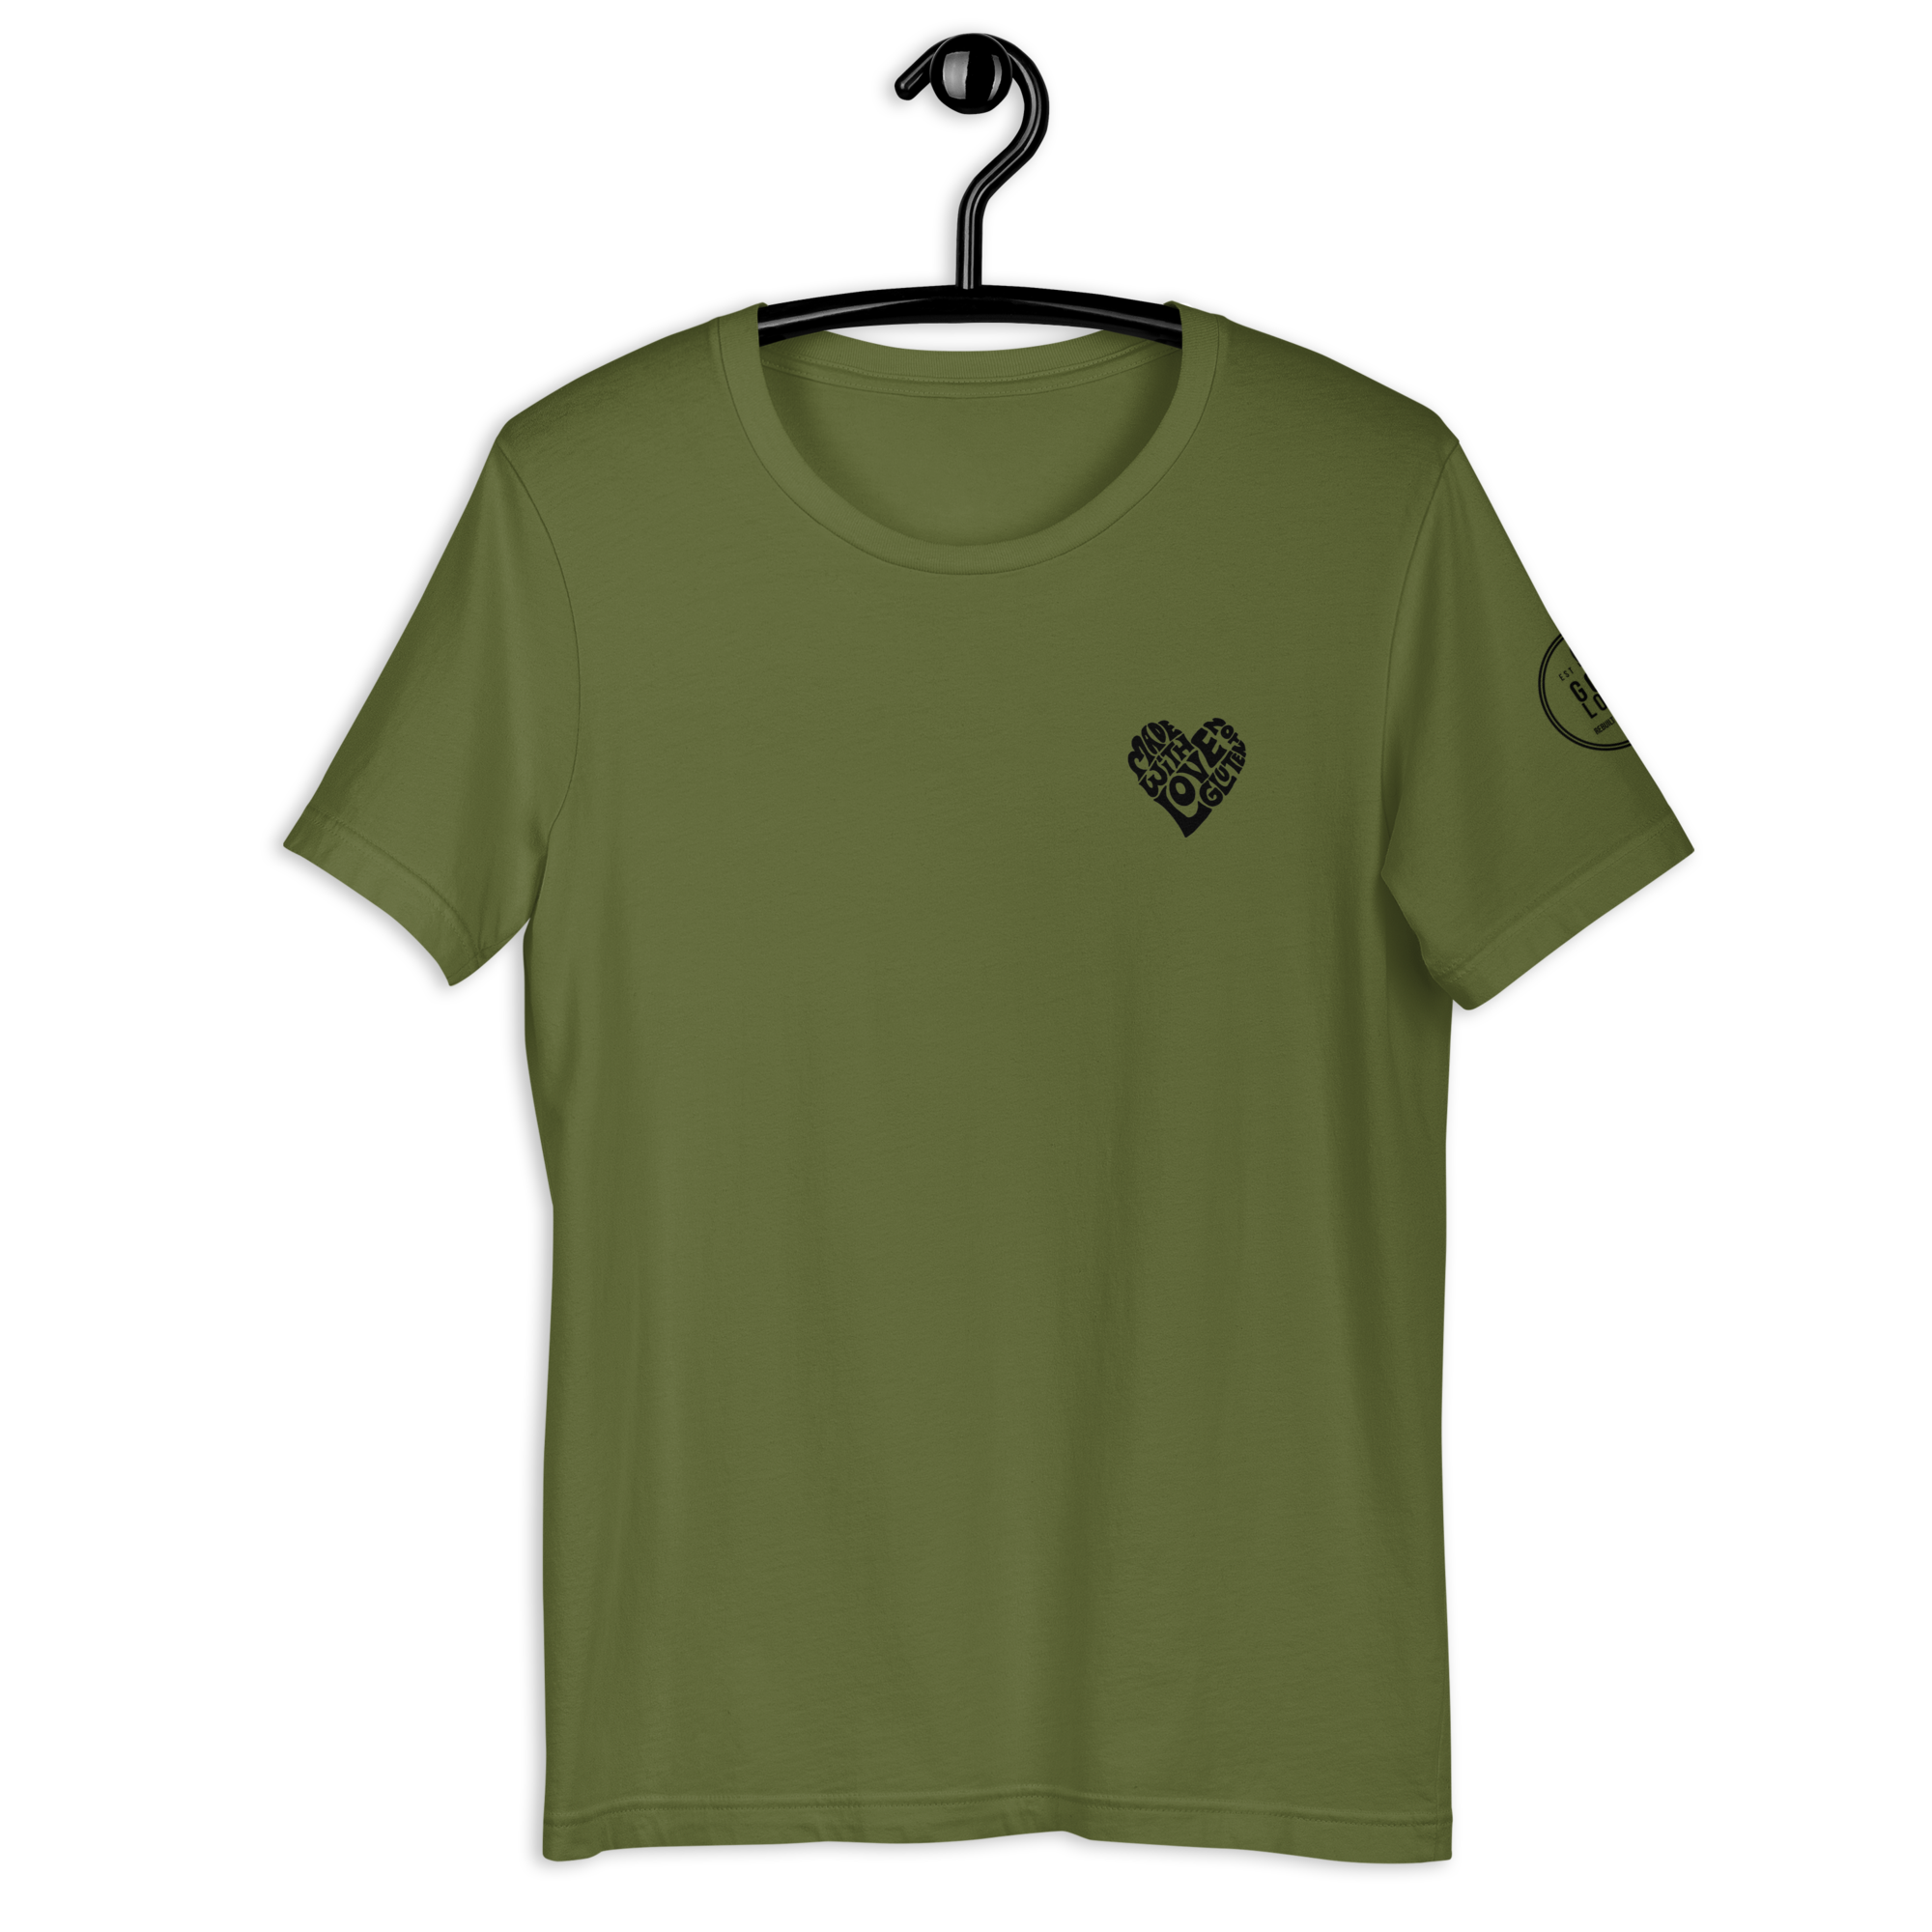 Made With Love Tee (Light Colors)